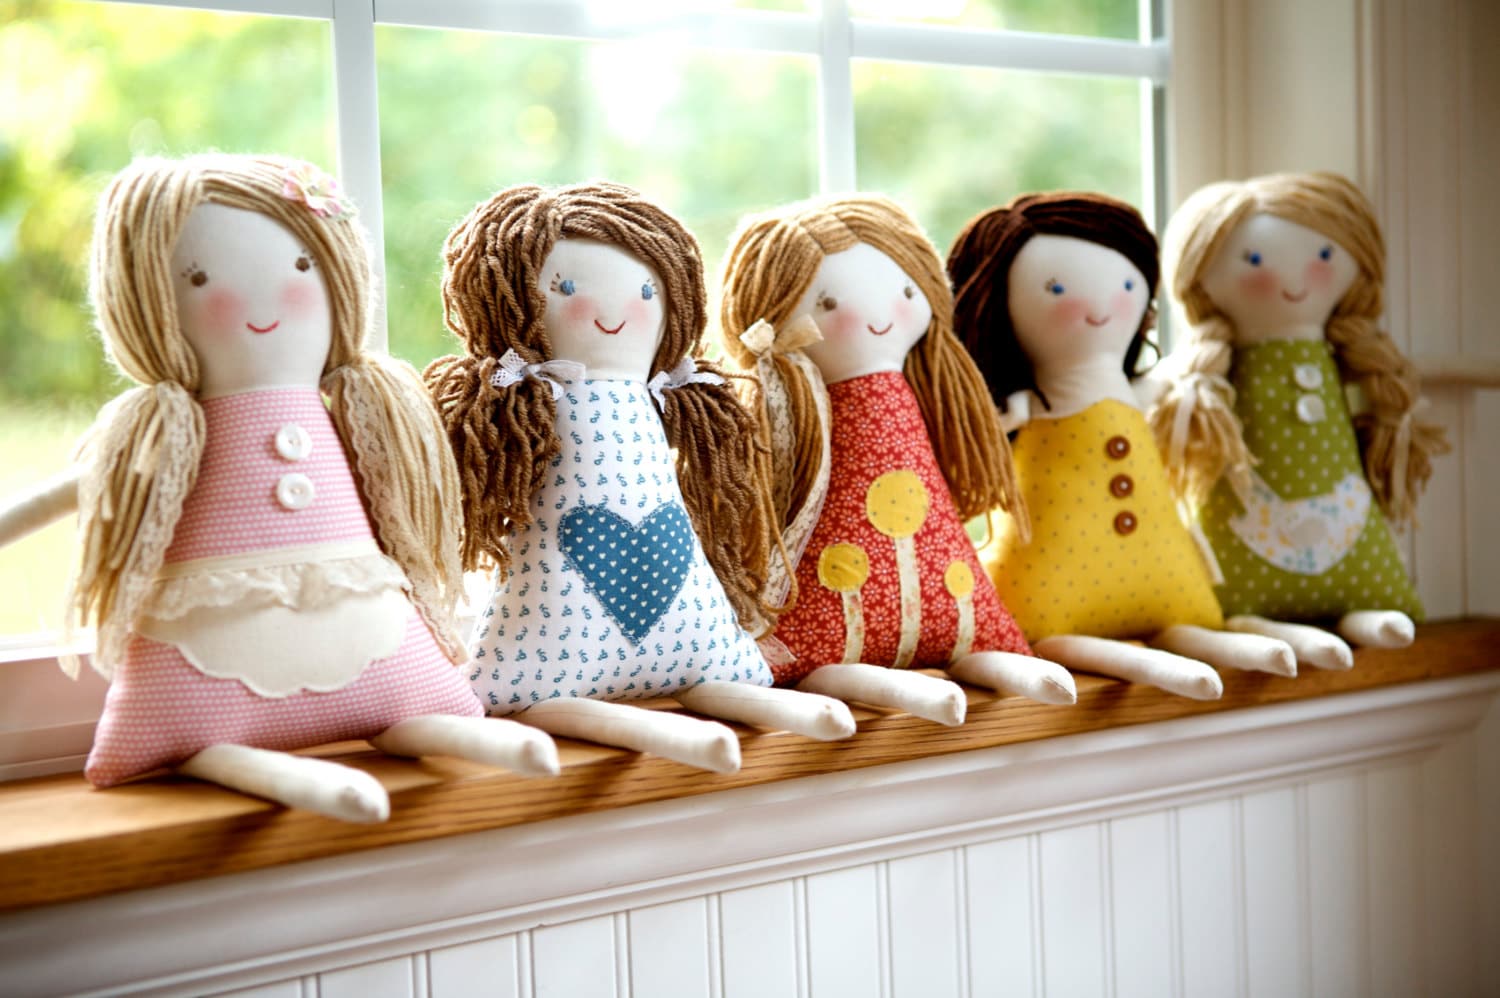  Baby dolls and Dolls on Pinterest